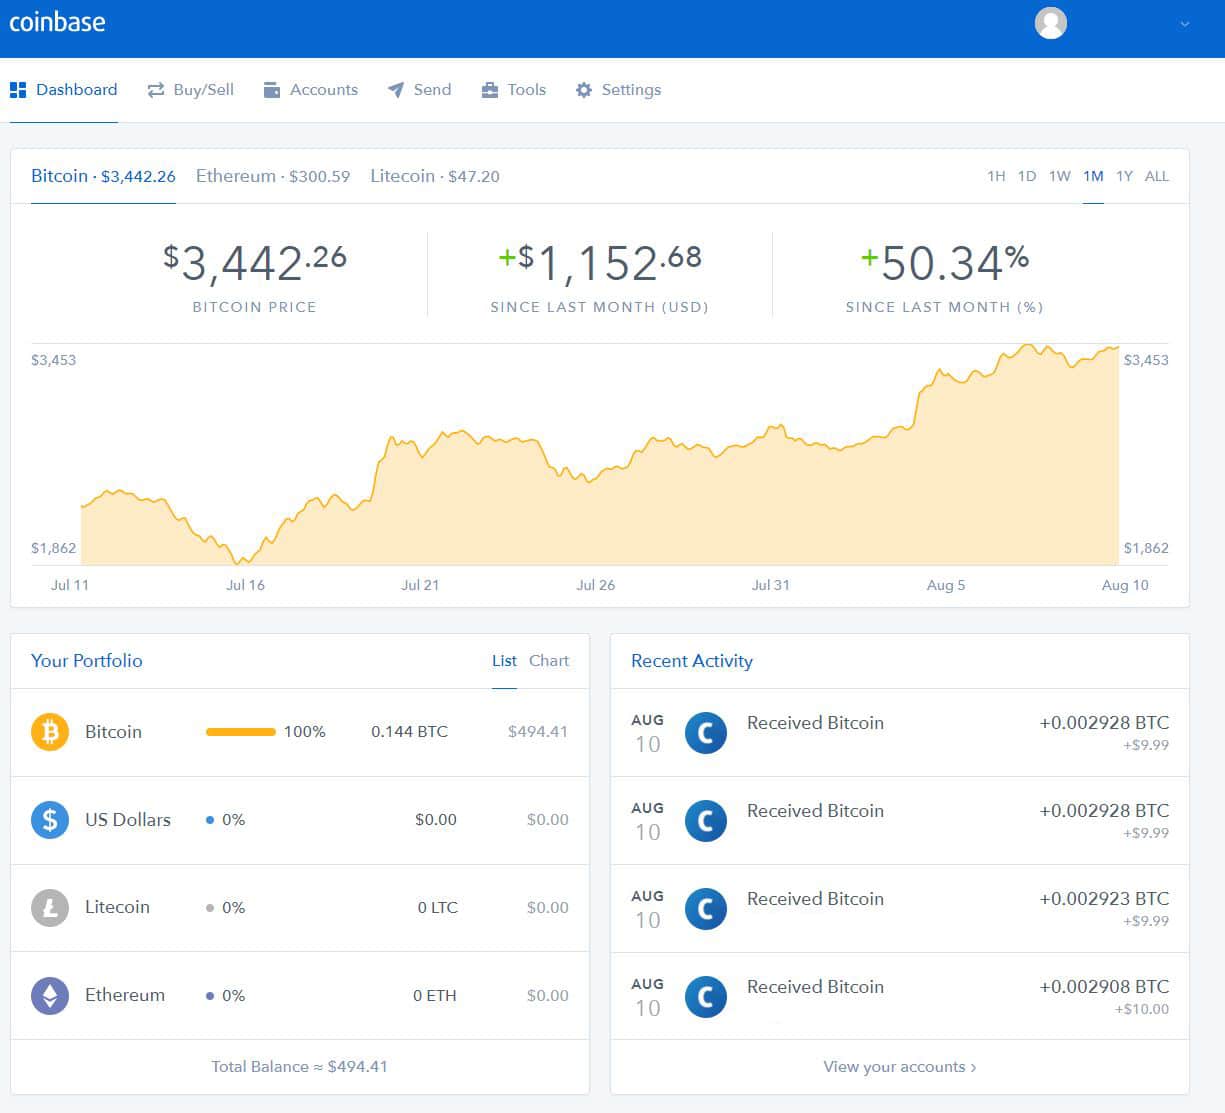 coinbase wallet review